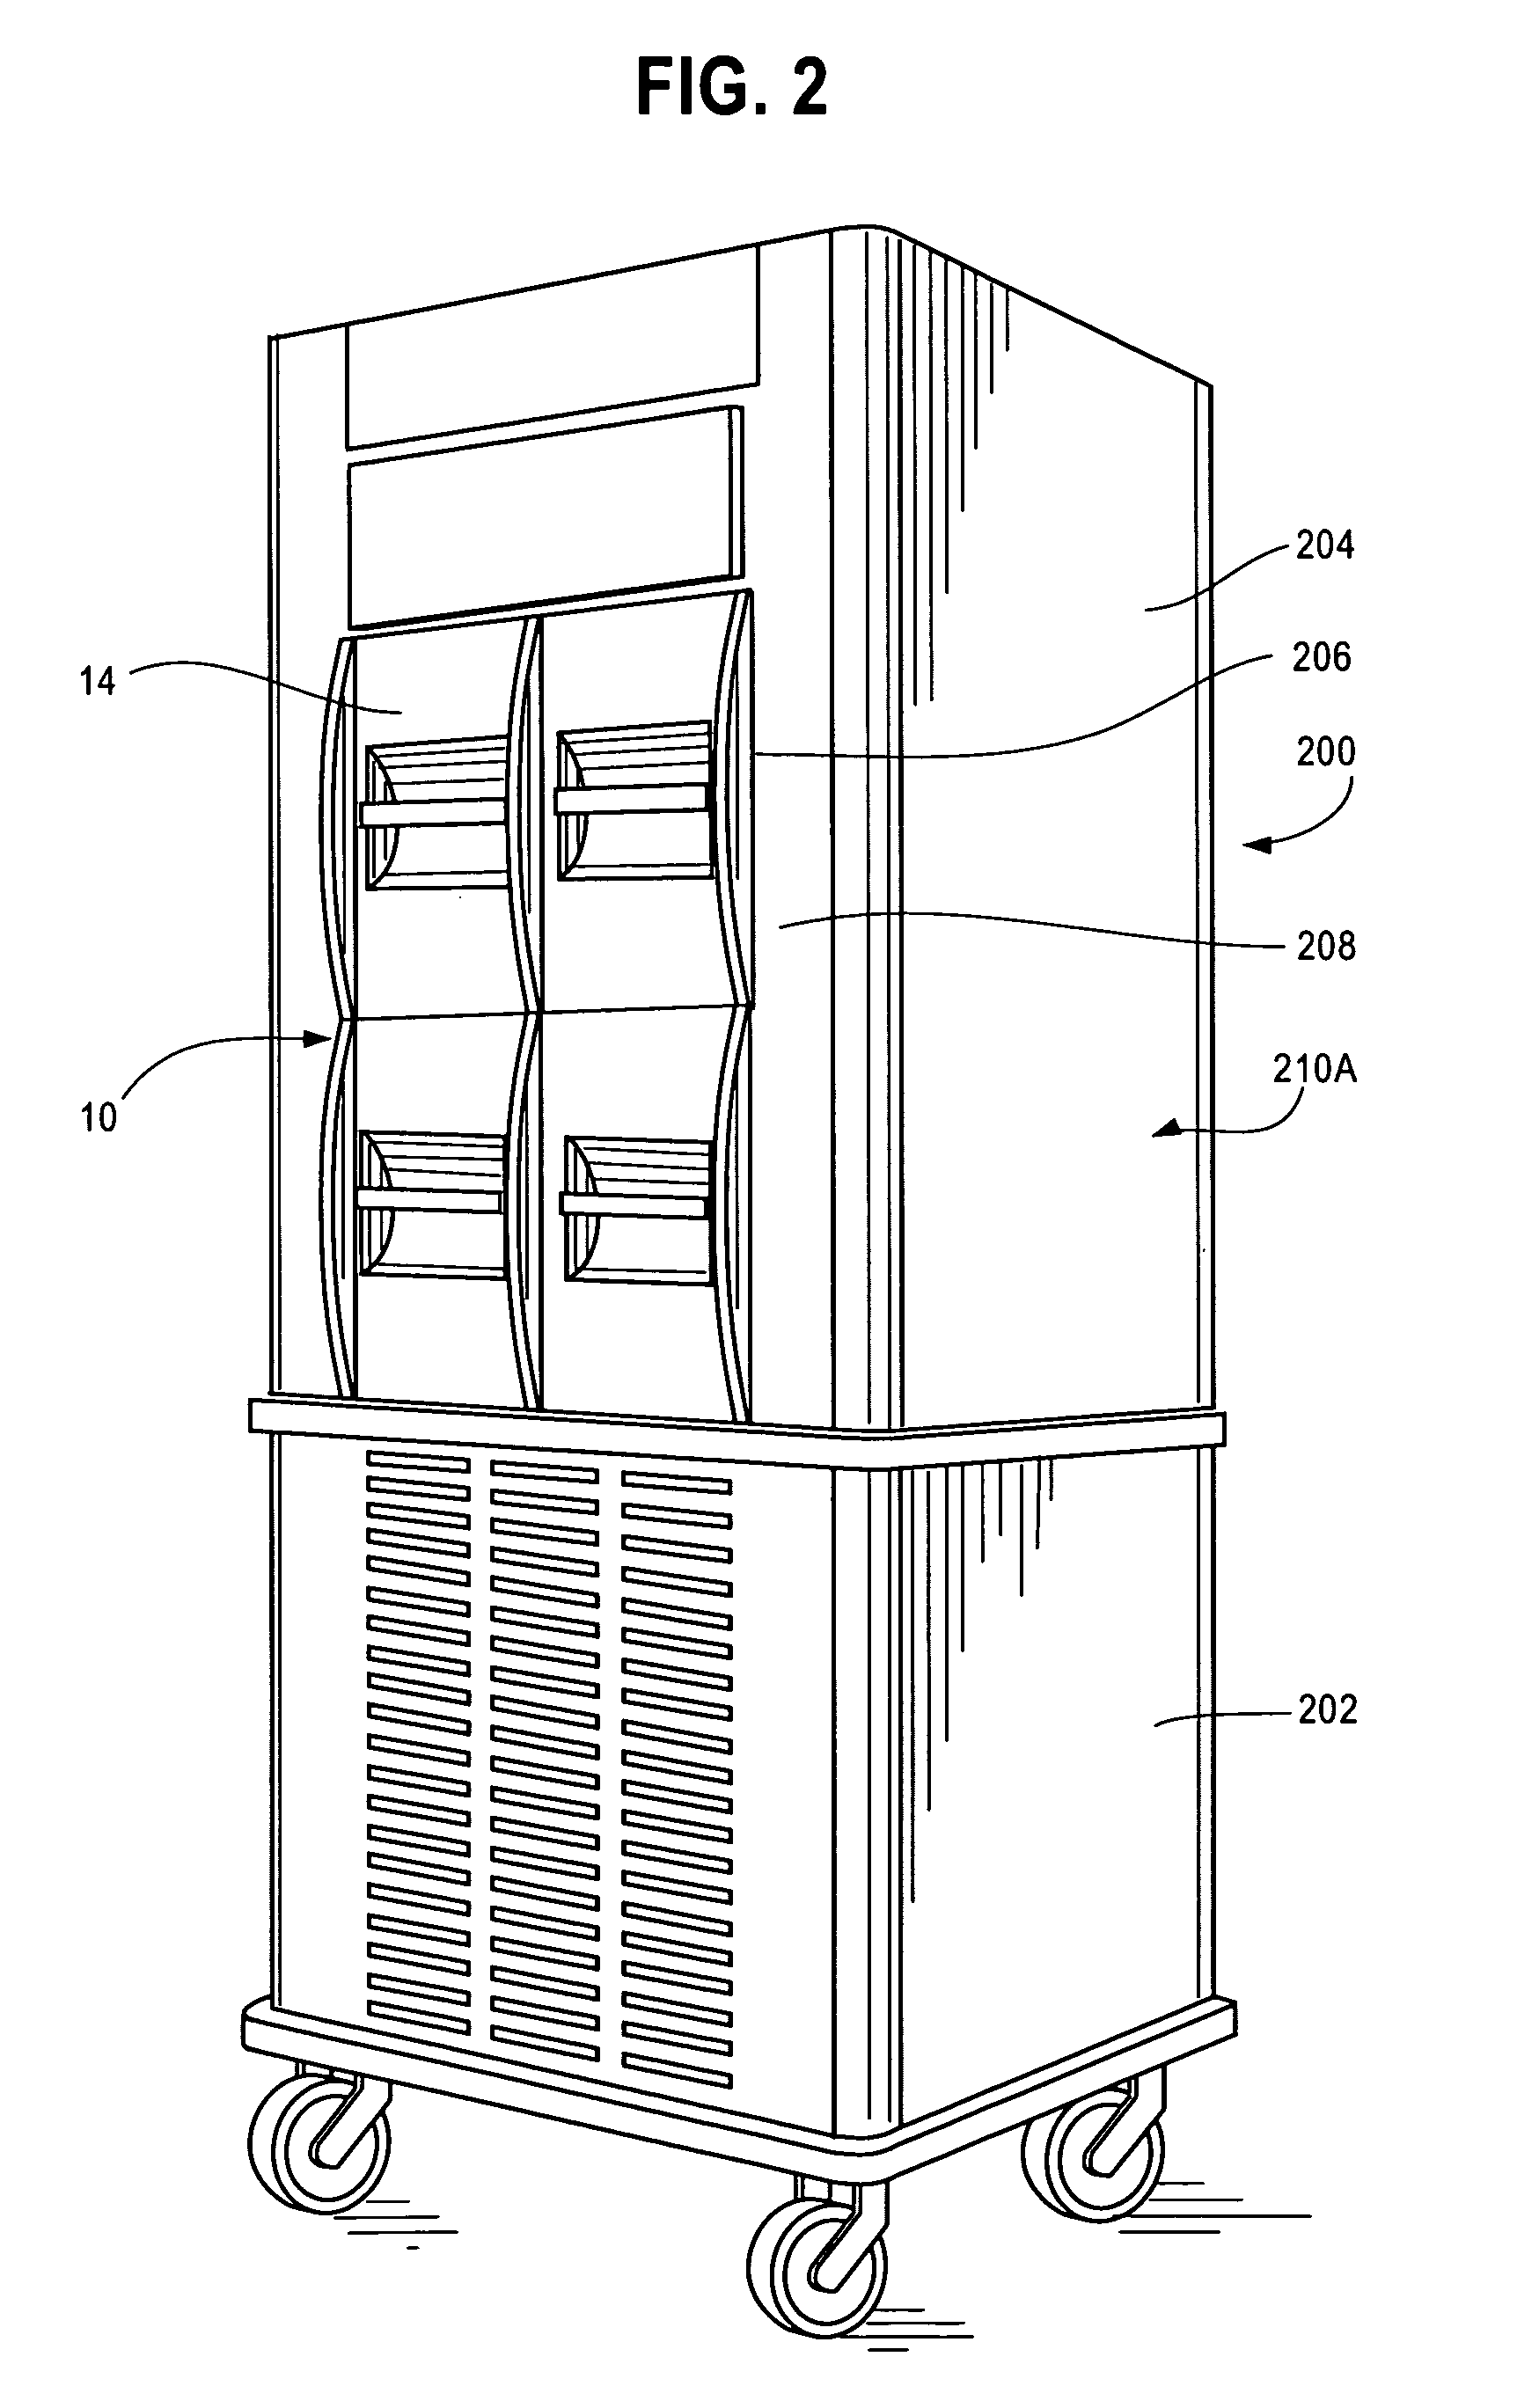 Incubation system with low temperature enclosure